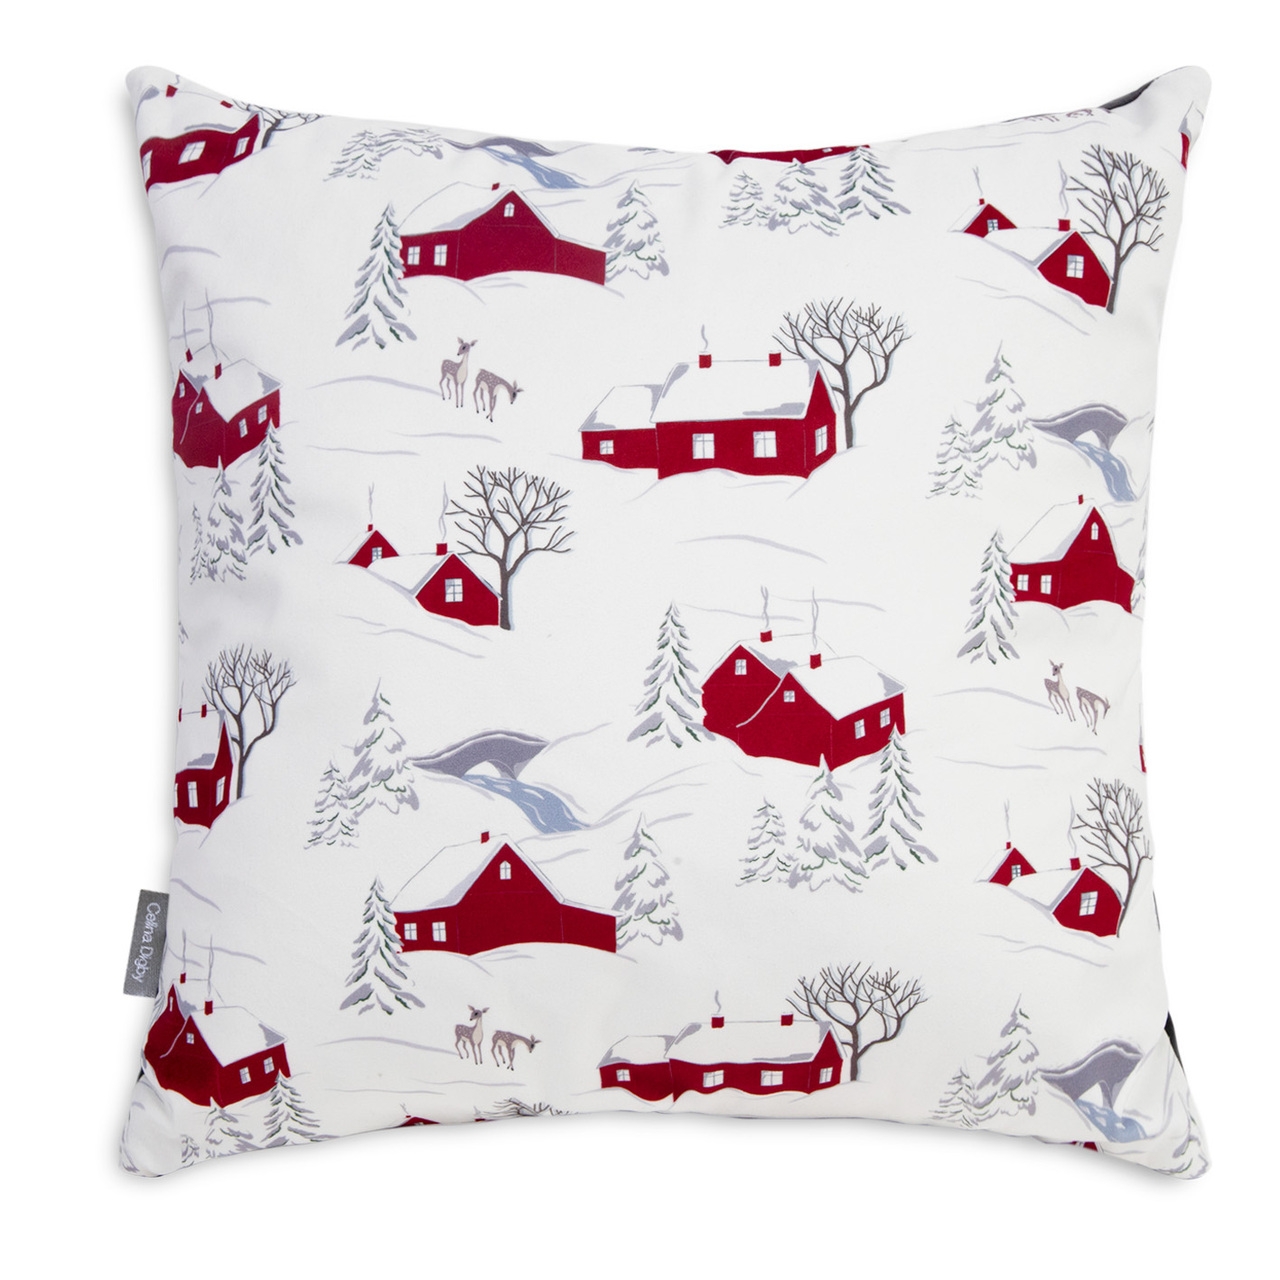 Celina Digby Luxury Christmas Velvet Cushion – Winter Village Available in 2 Sizes Extra Large (55cm) Hollow Fibre Filling